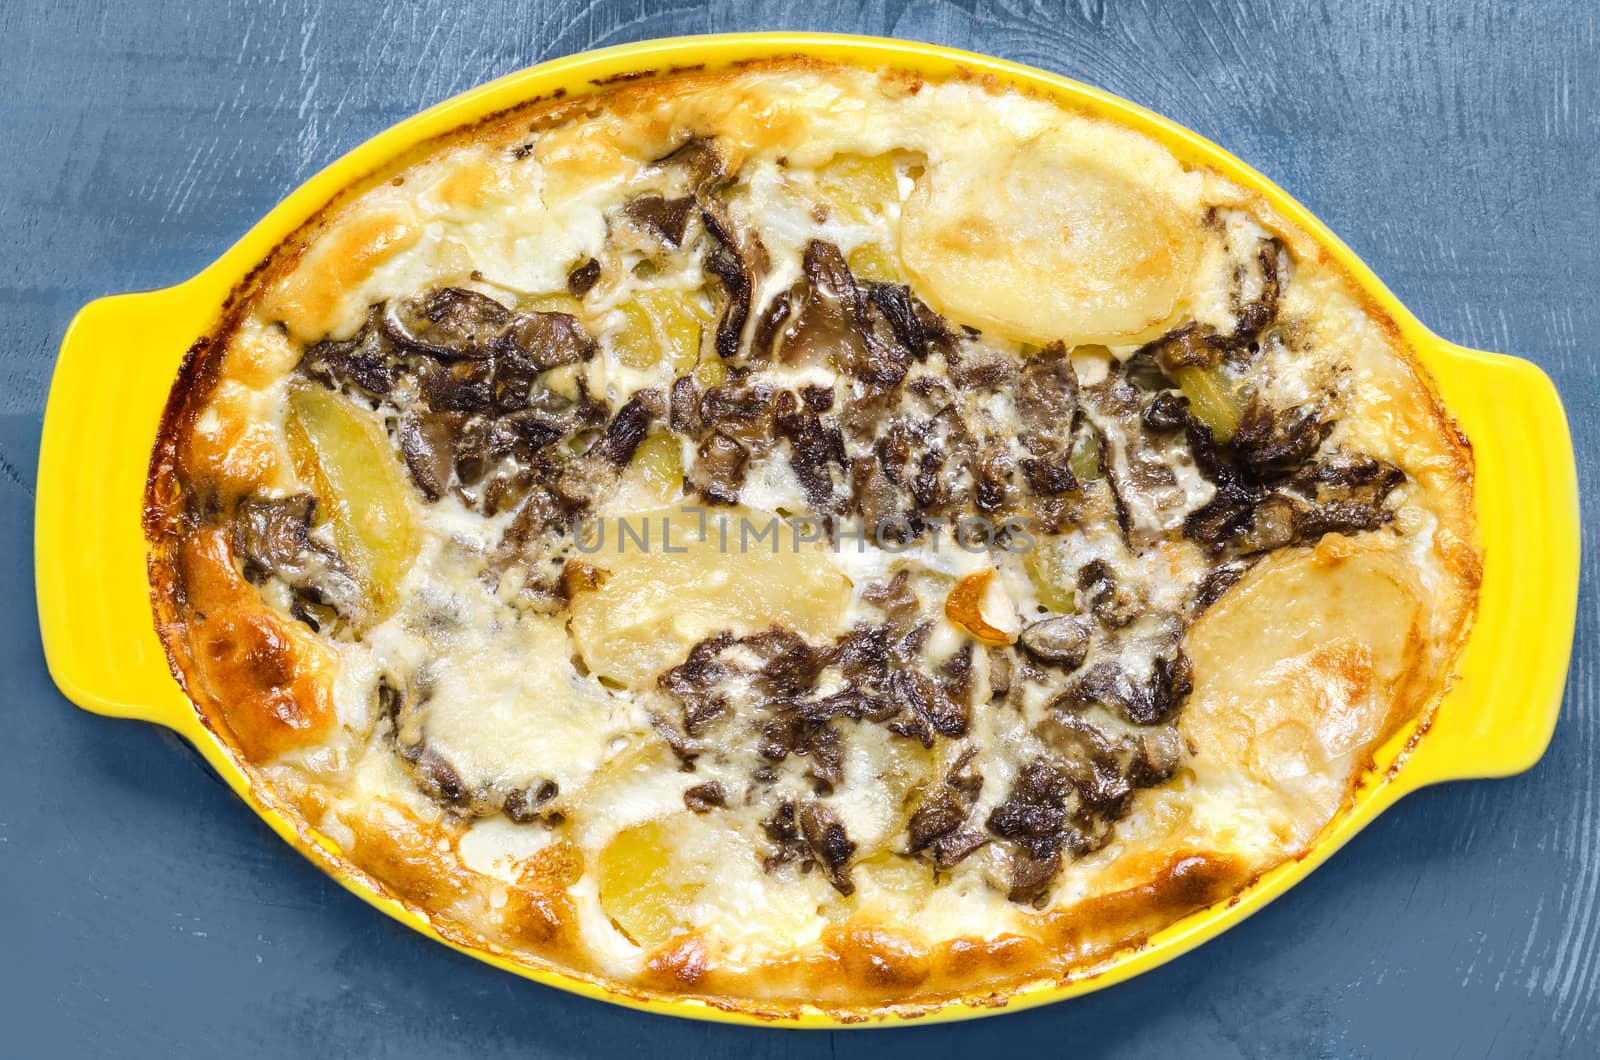 Sliced potatoes with mushrooms, baked in cream, on a blue wooden background